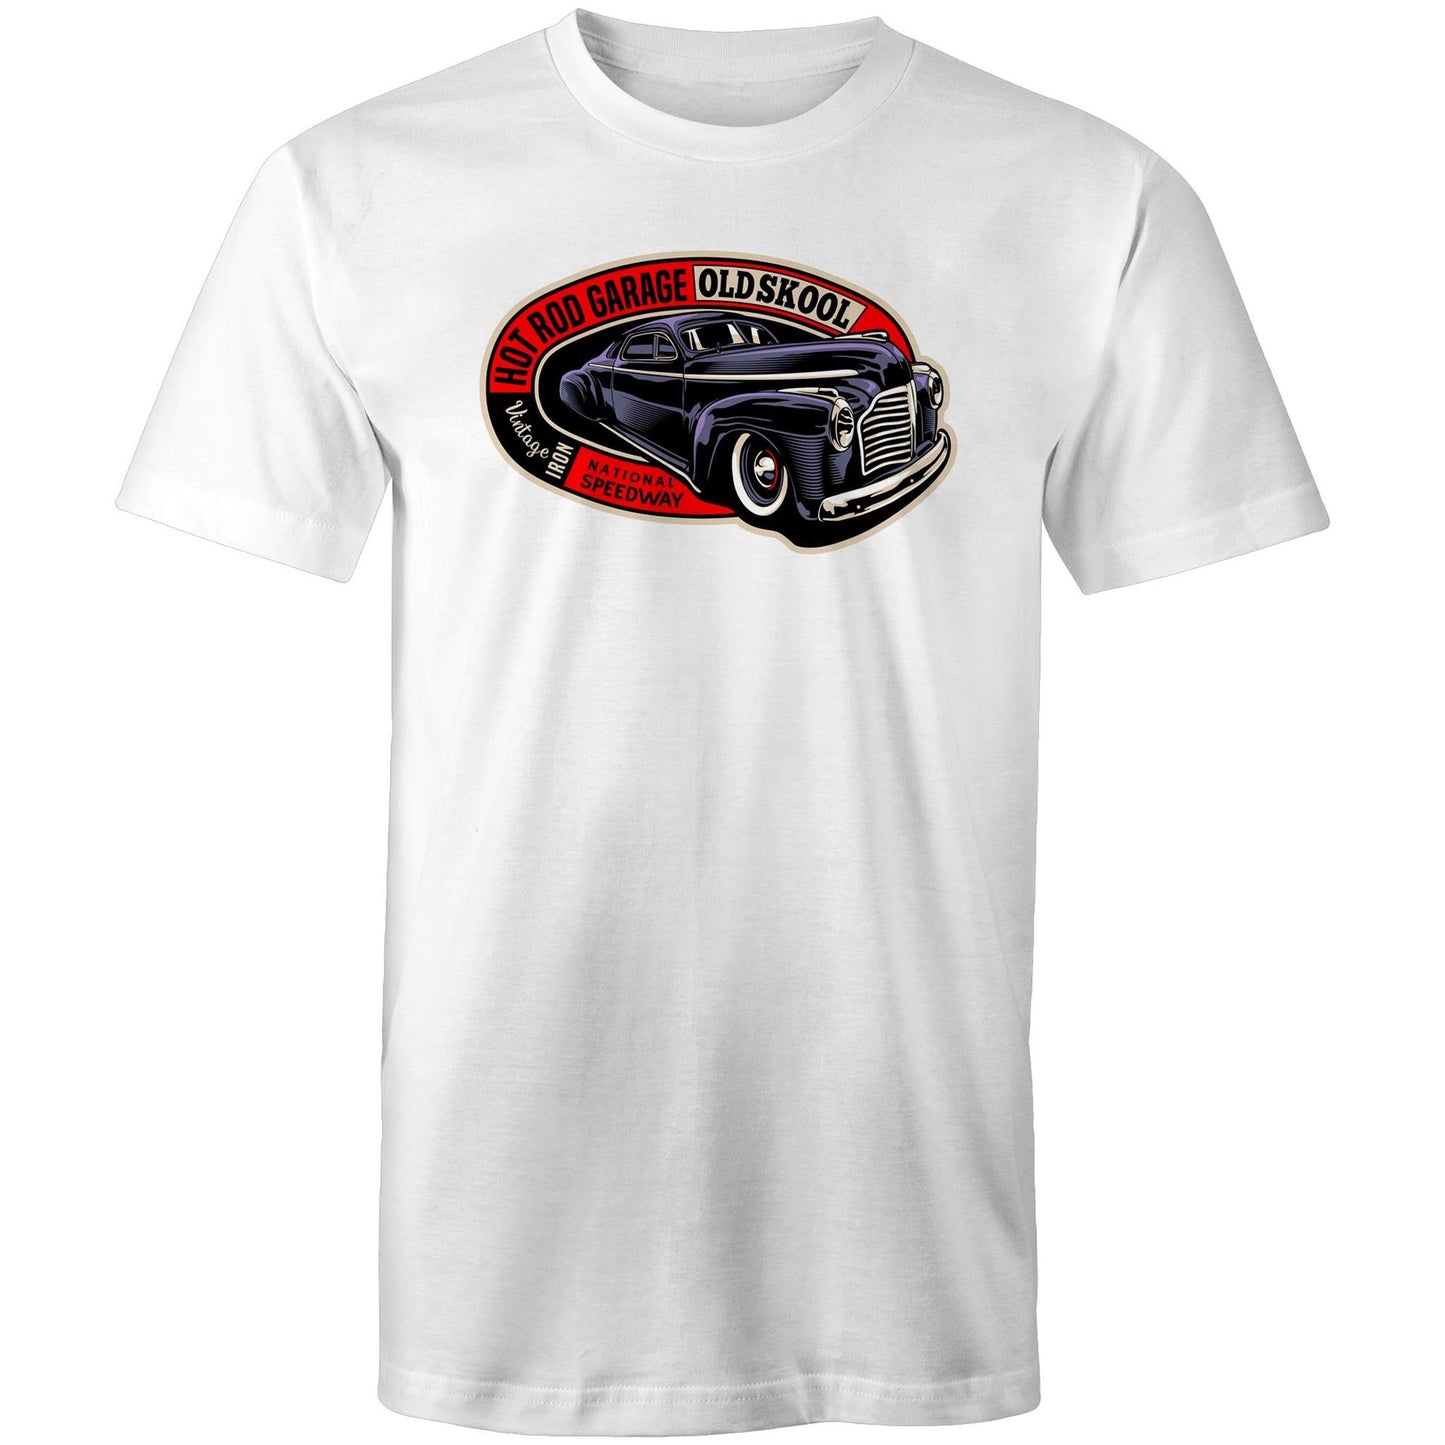 Old School T-Shirt Mens - Online Ordering Only